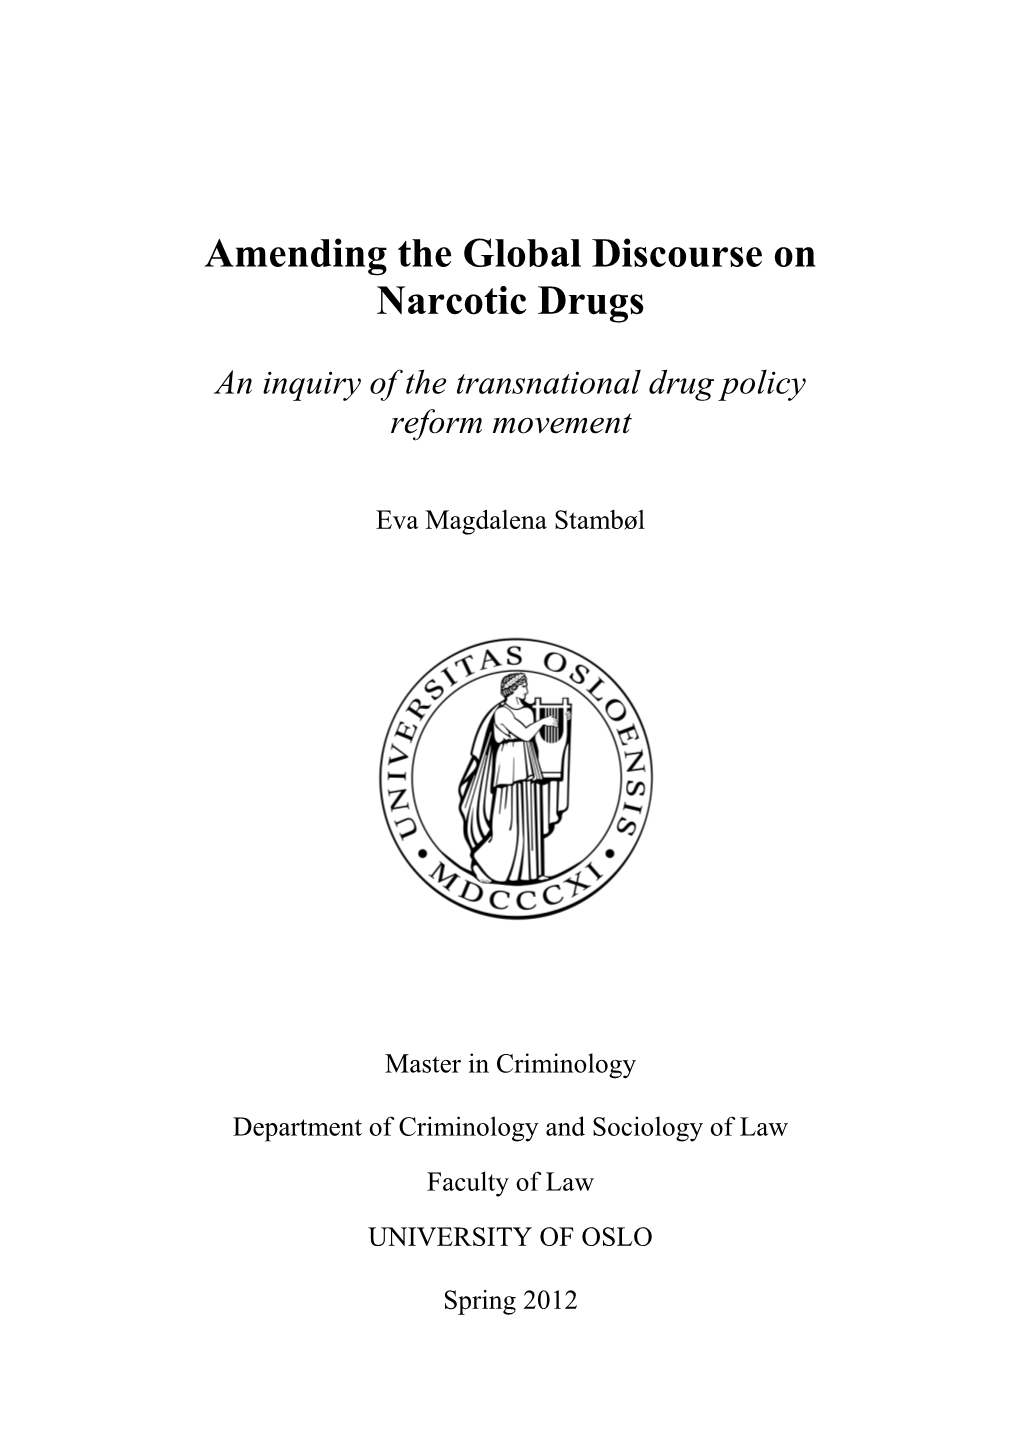 Amending the Global Discourse on Narcotic Drugs